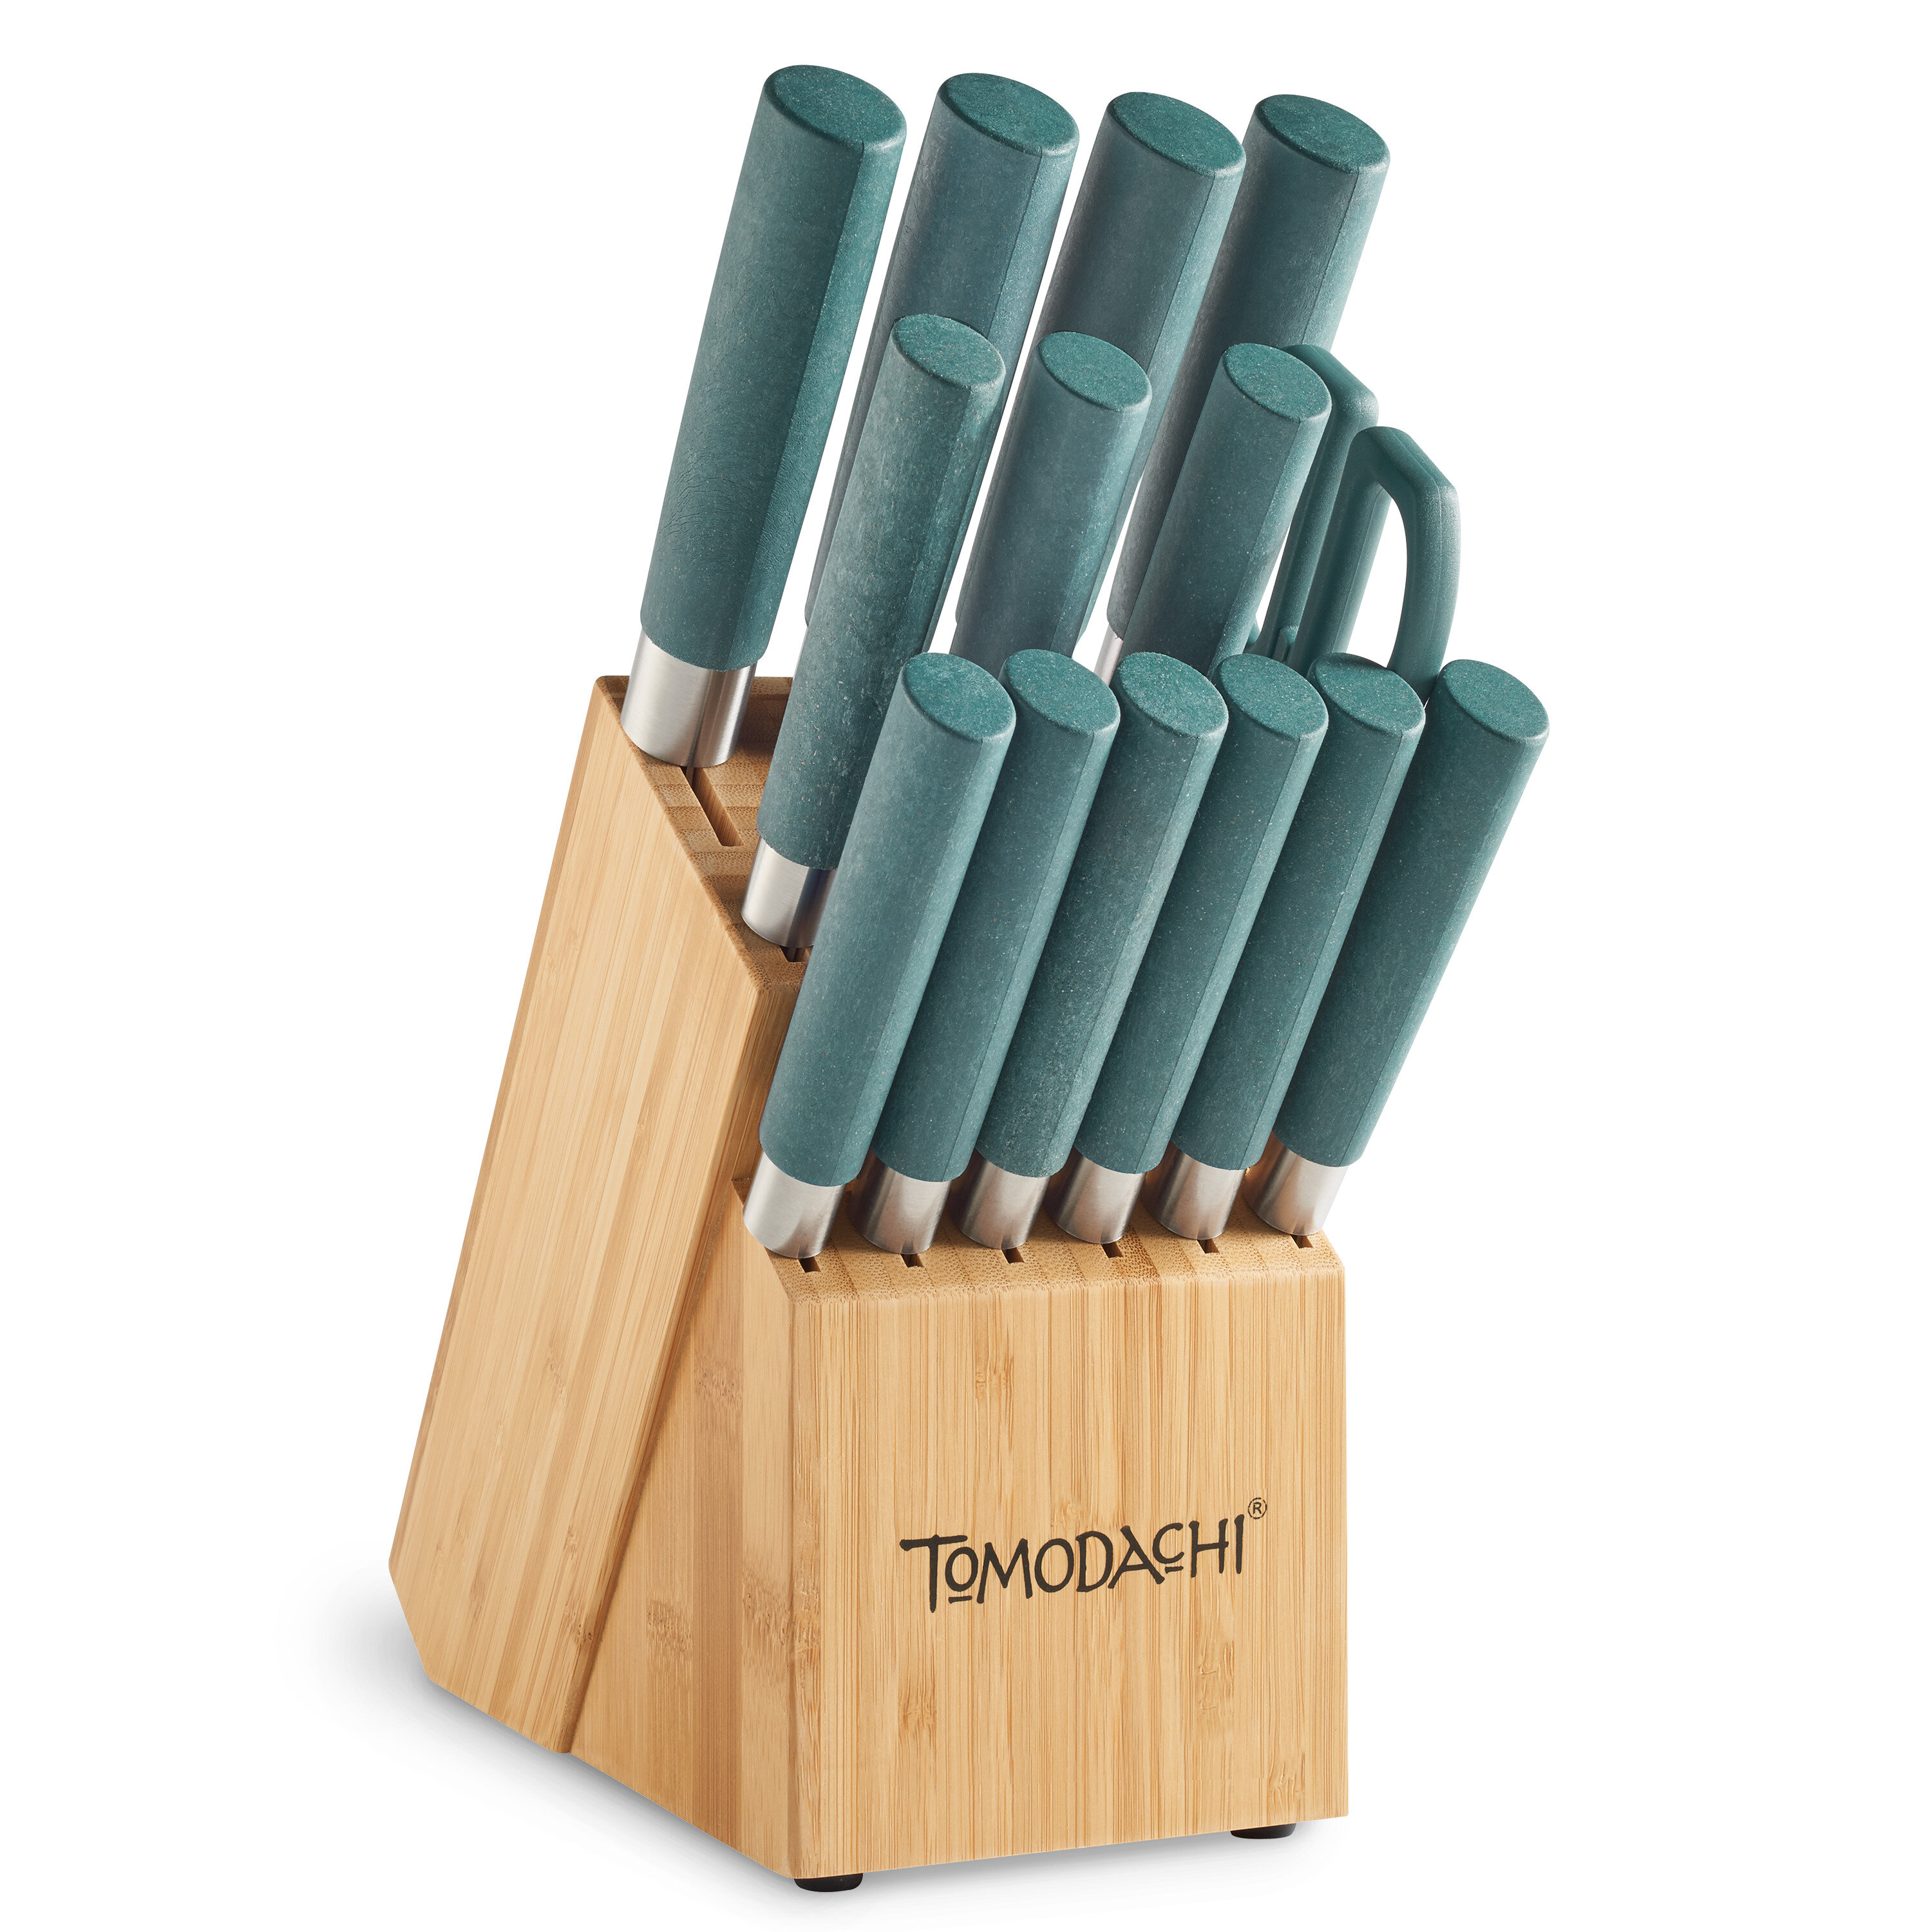 Tomodachi 3 Piece Pairing Knife Set With Printed Blades - Lot Of 2